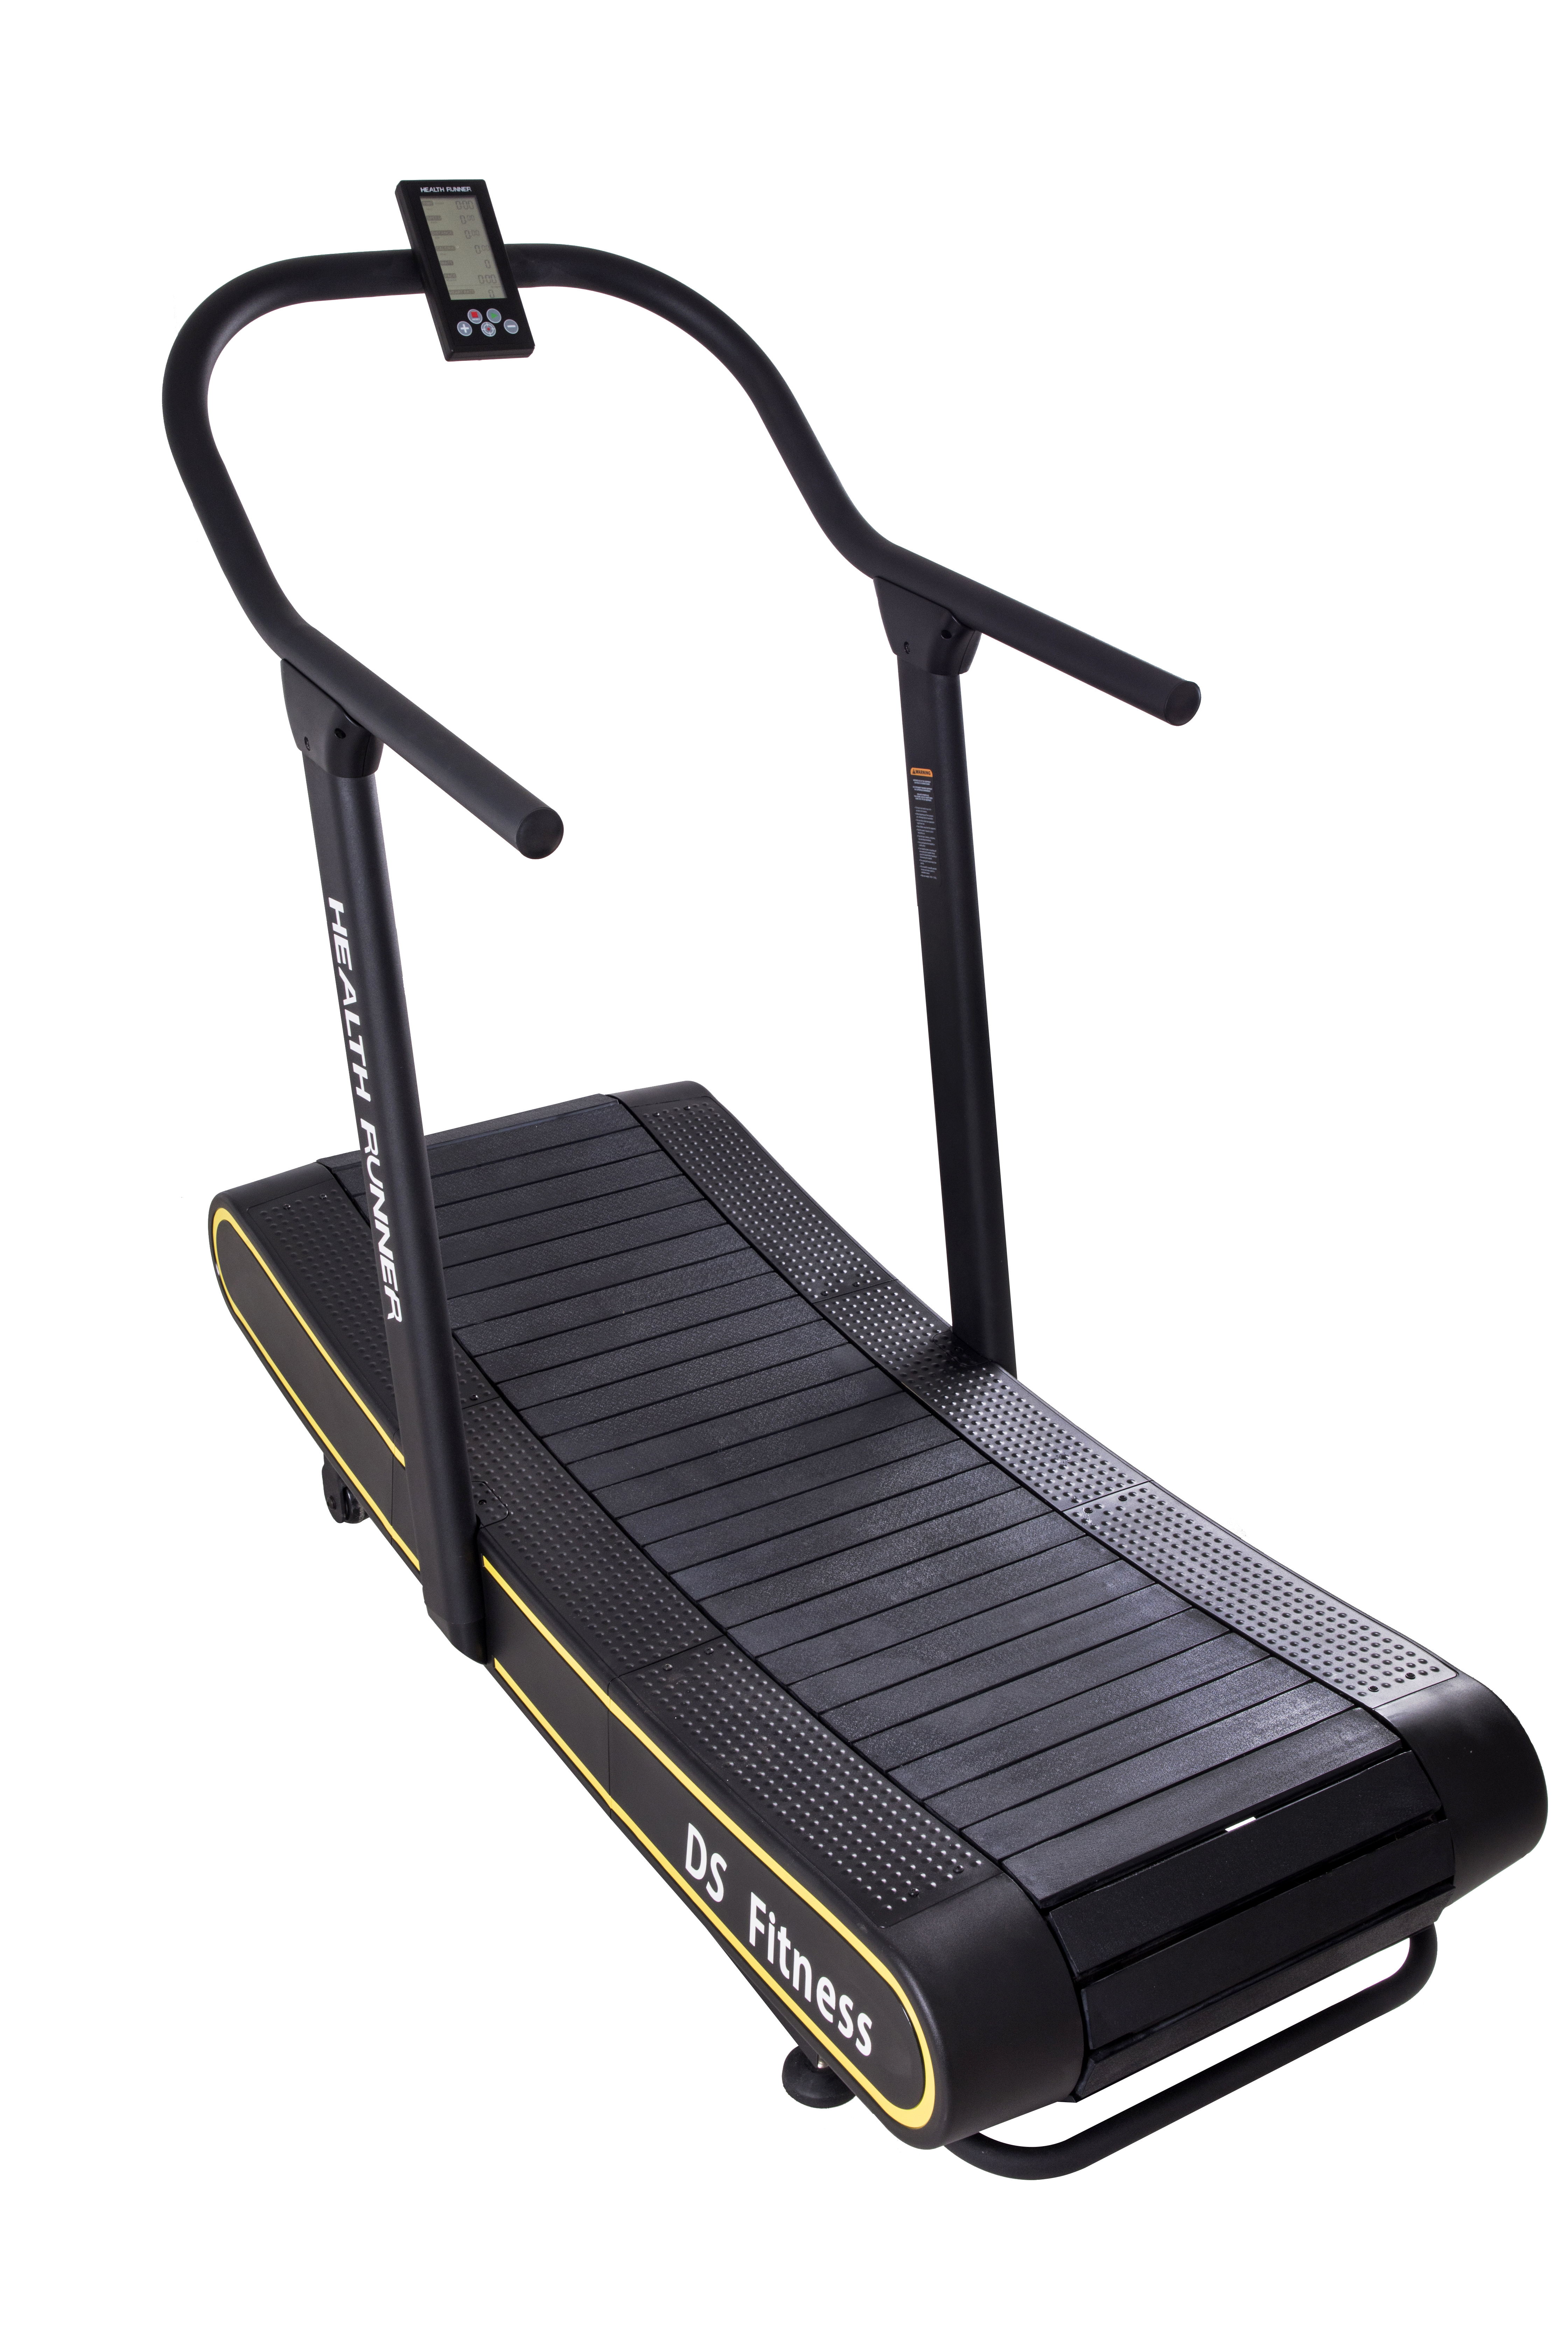 Motorless Customized Home Commercial Curved Treadmill